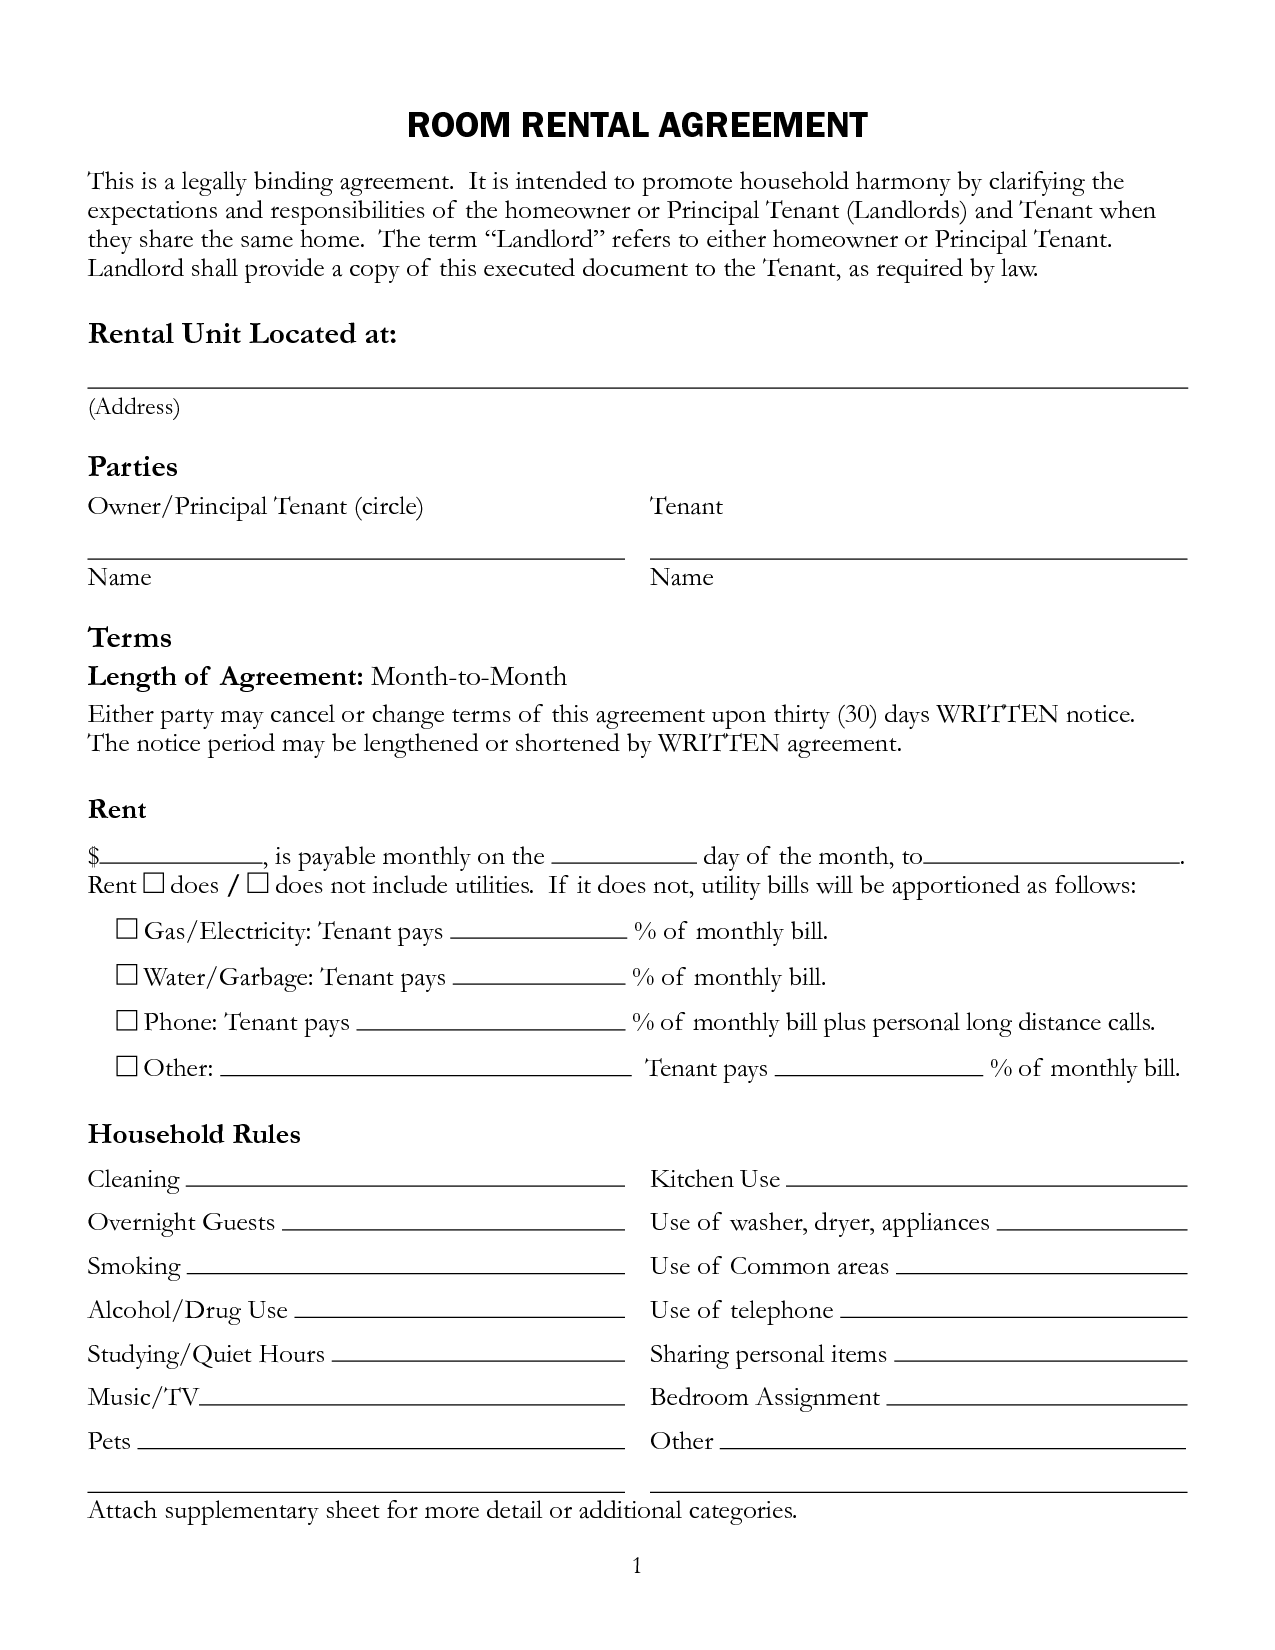 rental-agreement-template-free-printable-documents